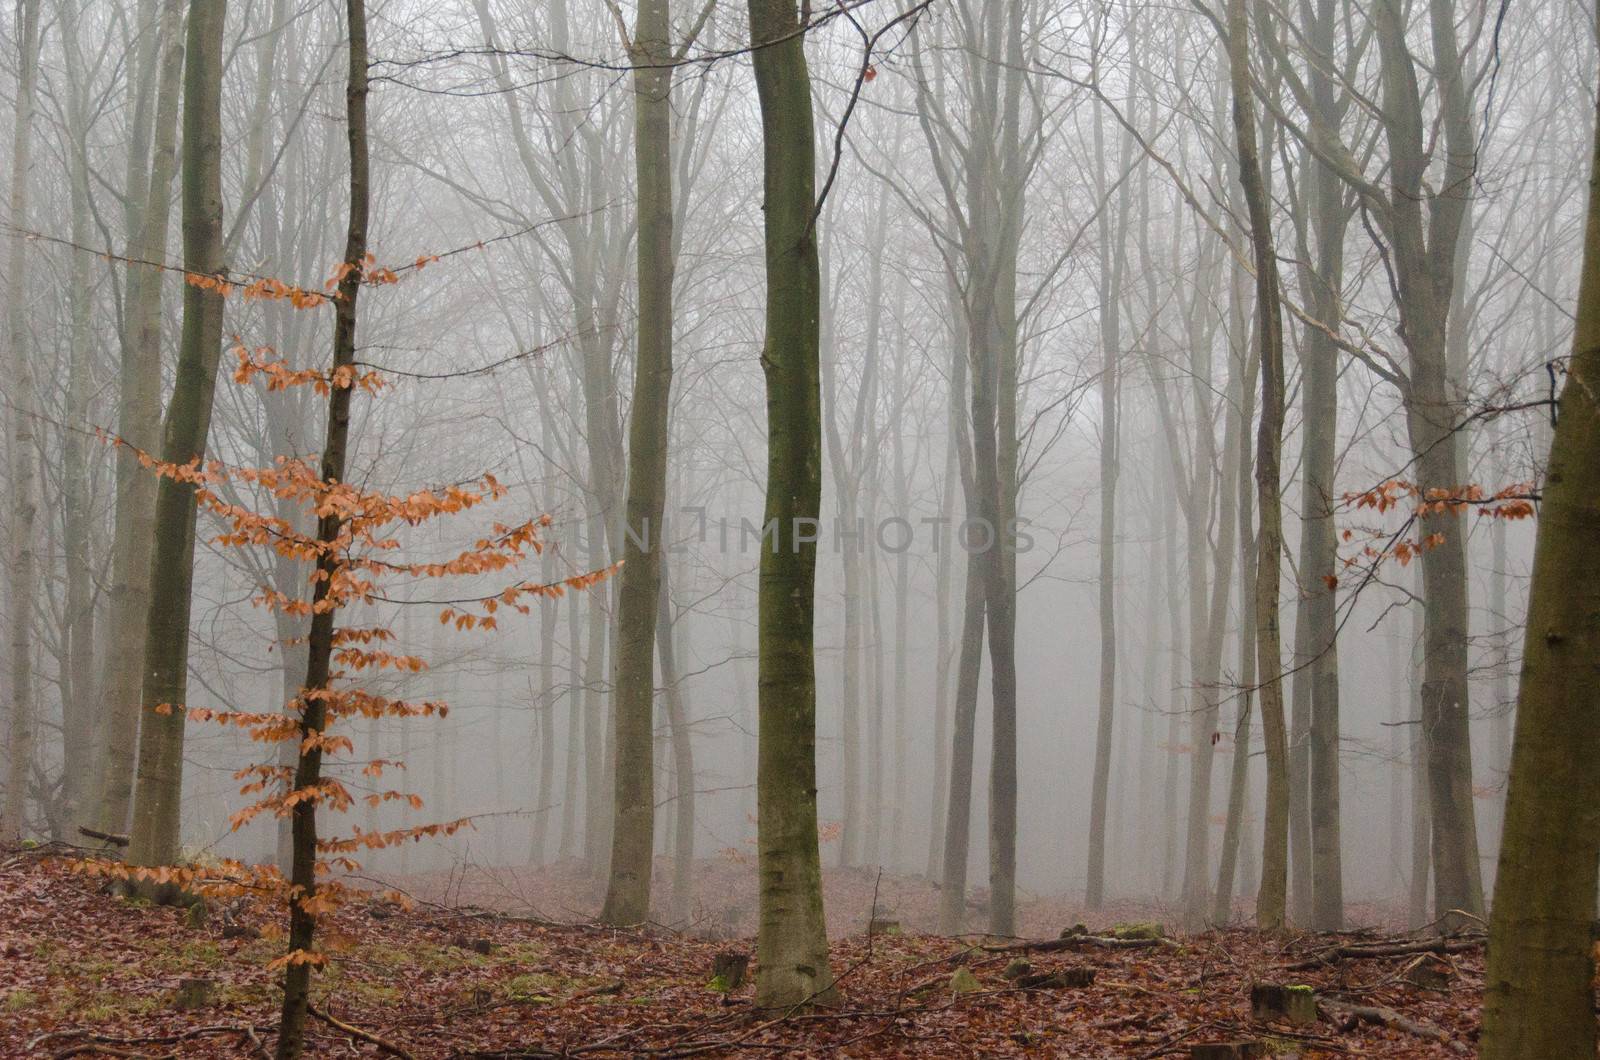 fog in a beech forest in winter without snow and leaves